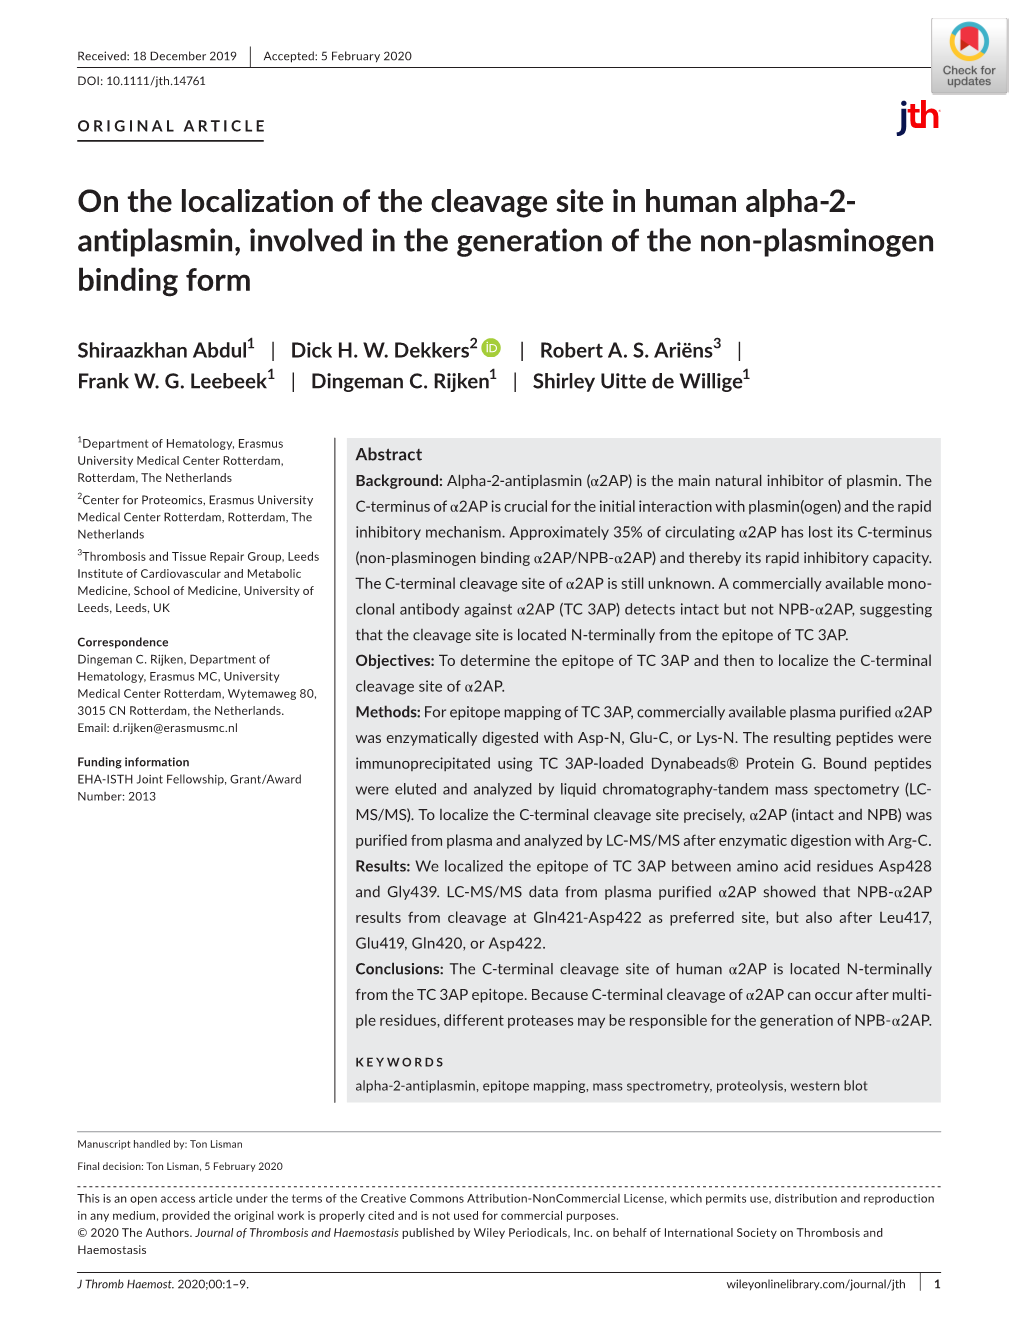 On the Localization of the Cleavage Site in Human Alpha‐2‐Antiplasmin